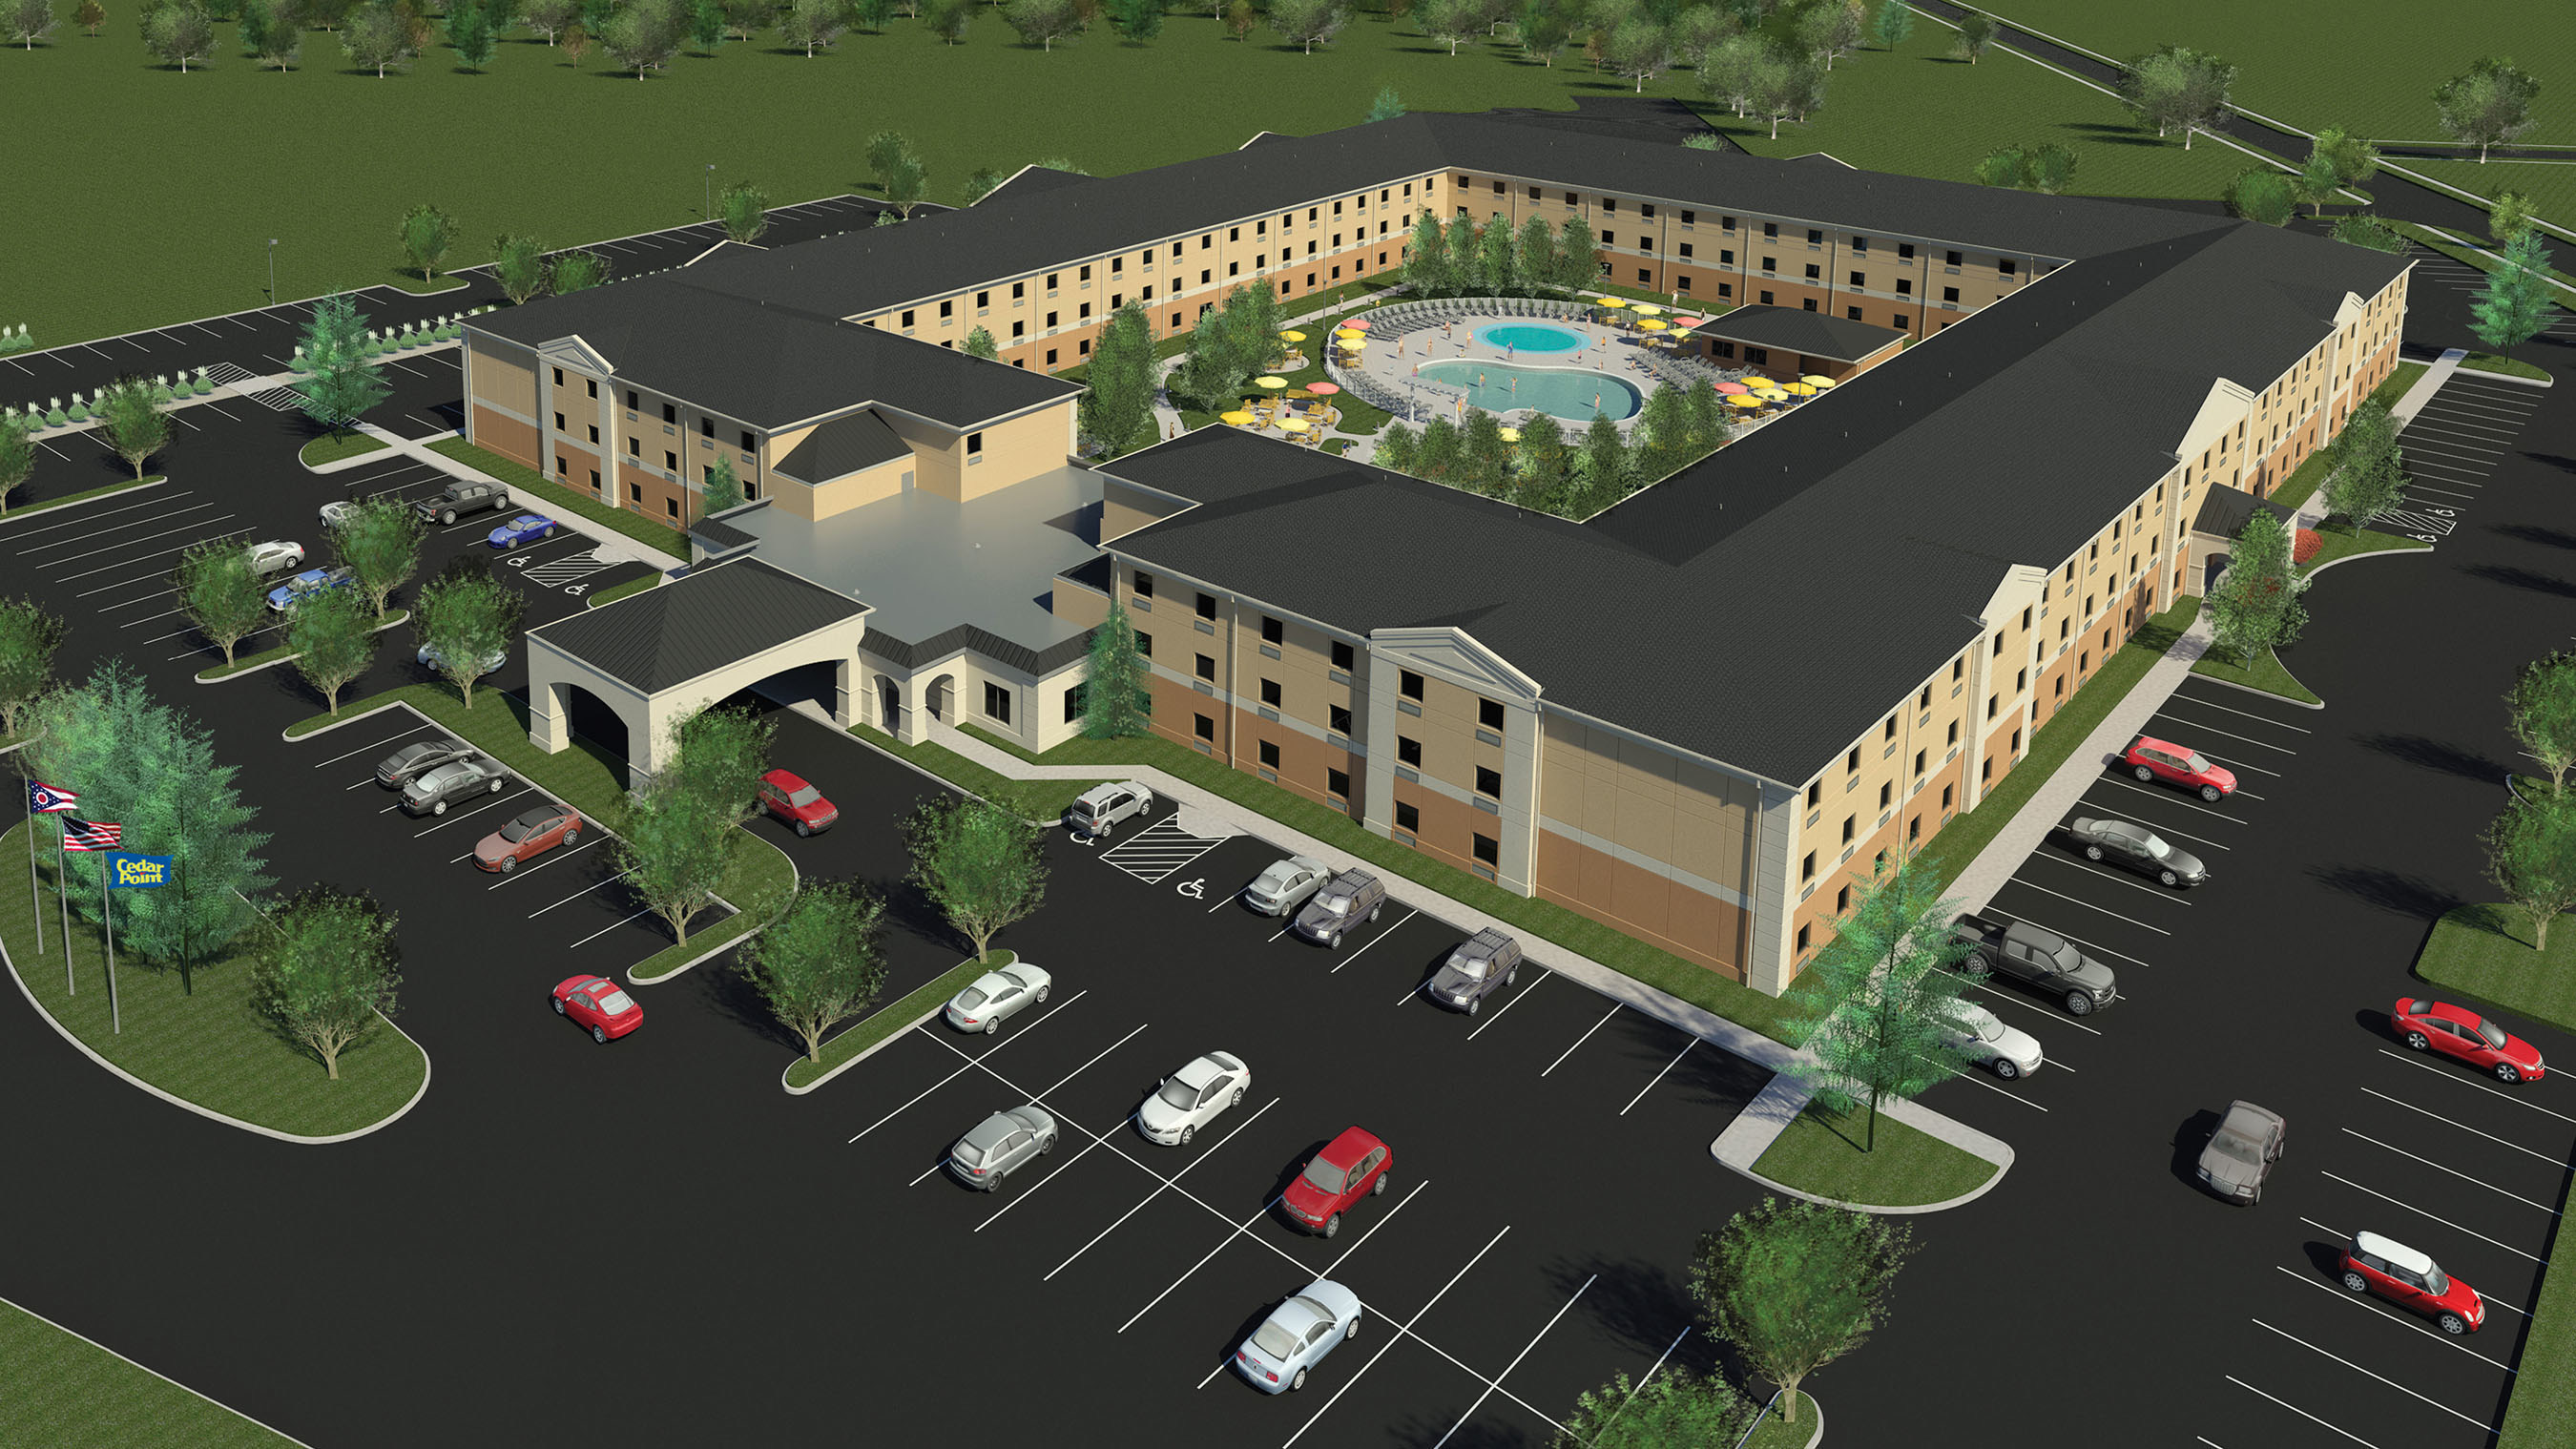 Breakers Express transforms into Cedar Point's Express Hotel in 2017 with a complete renovation. The hotel will add 69 new rooms, updated bathrooms and bedding, connecting family suites and more. A new splash pad and outdoor courtyard featuring conversational living spaces will join the whimsical swimming pool and deck area.